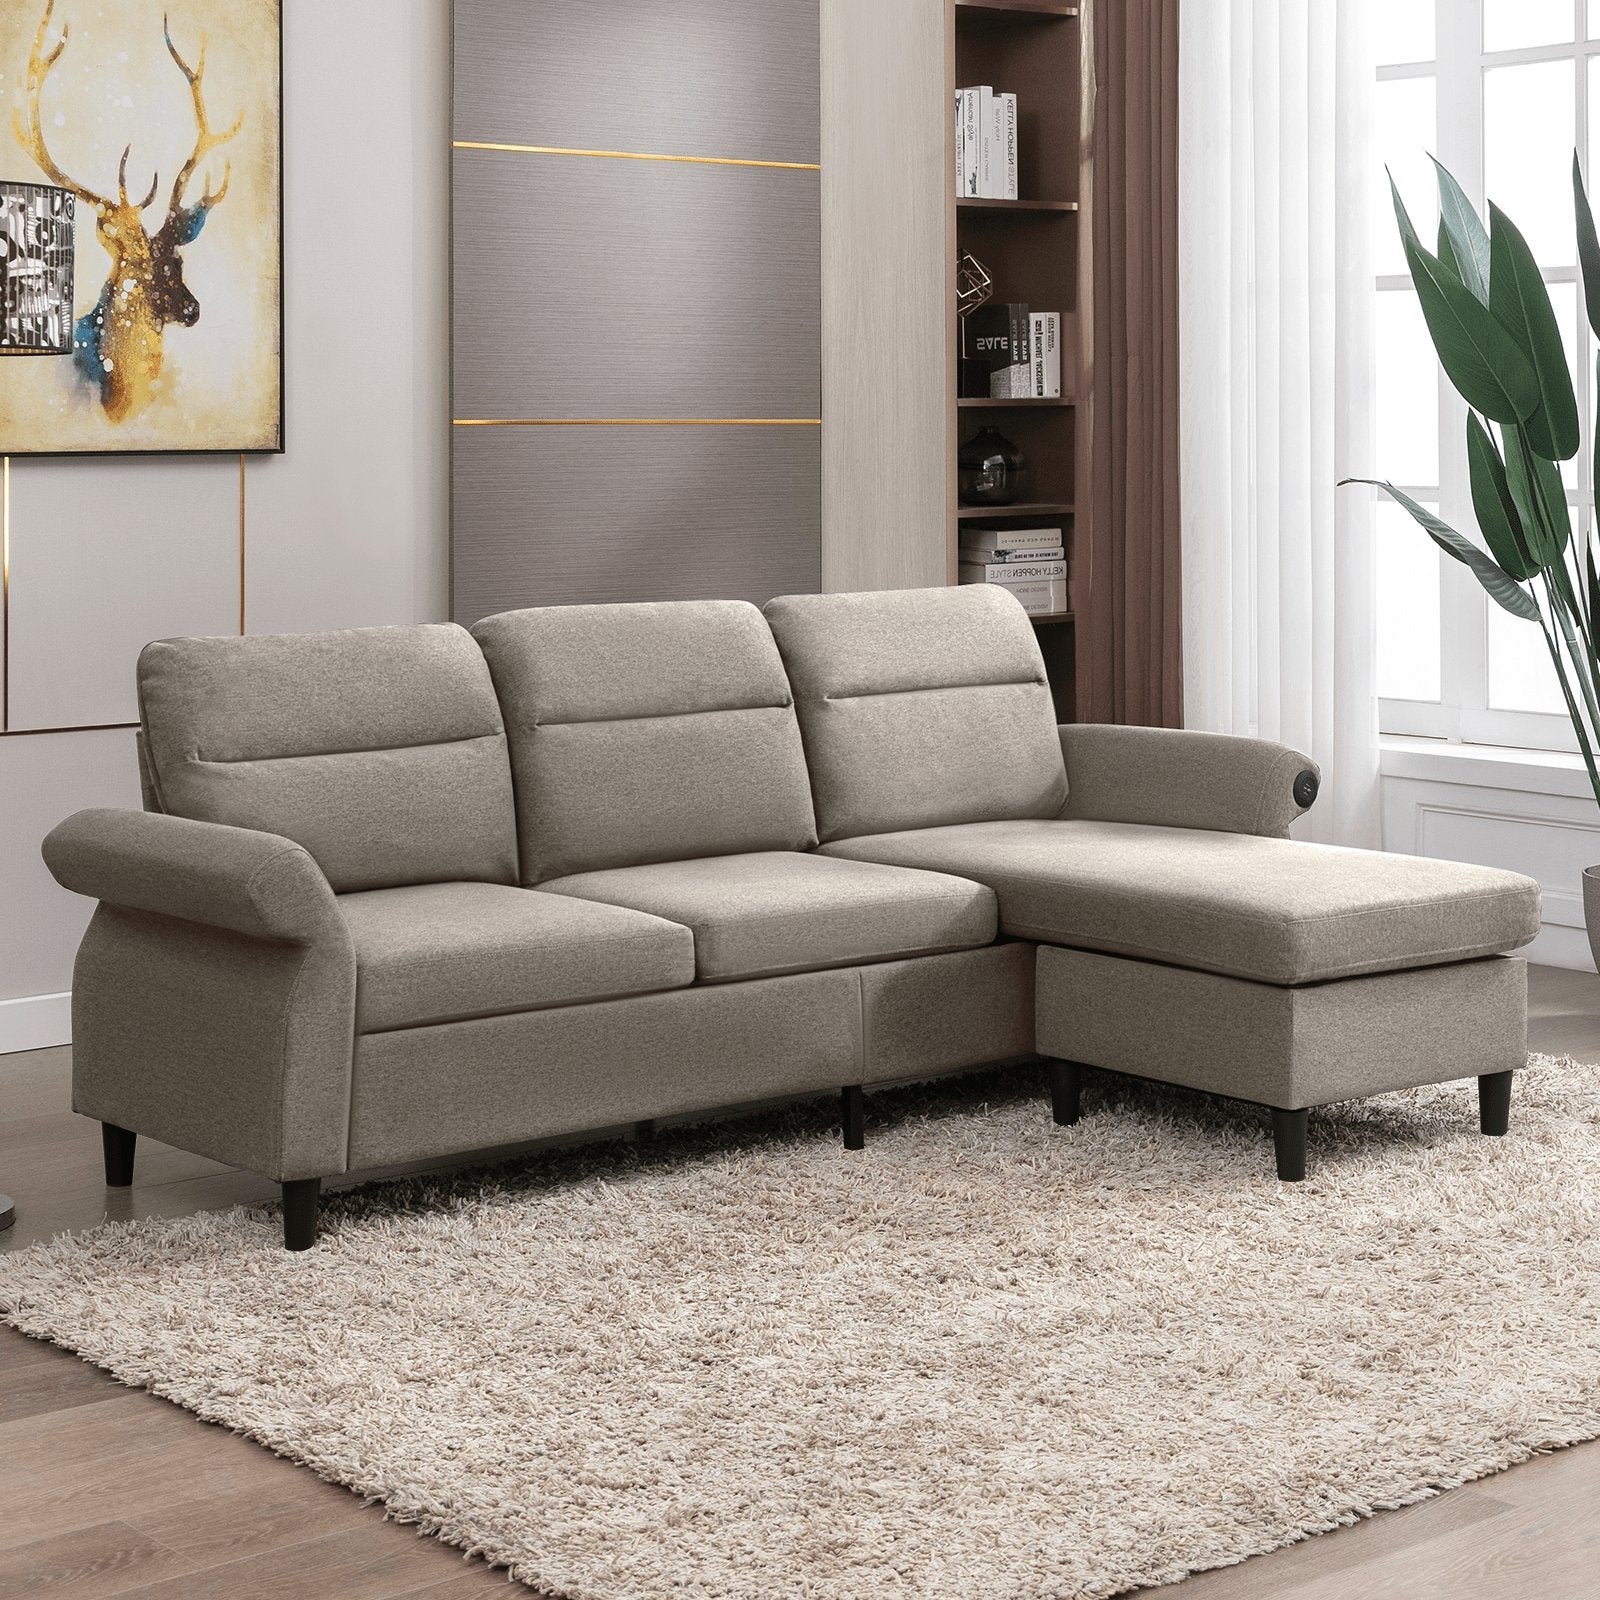 Convertible Sectional Sofa | 3 Seat Couch with 2 USB Ports and Adjustable Armrest - uenjoysectional sofa